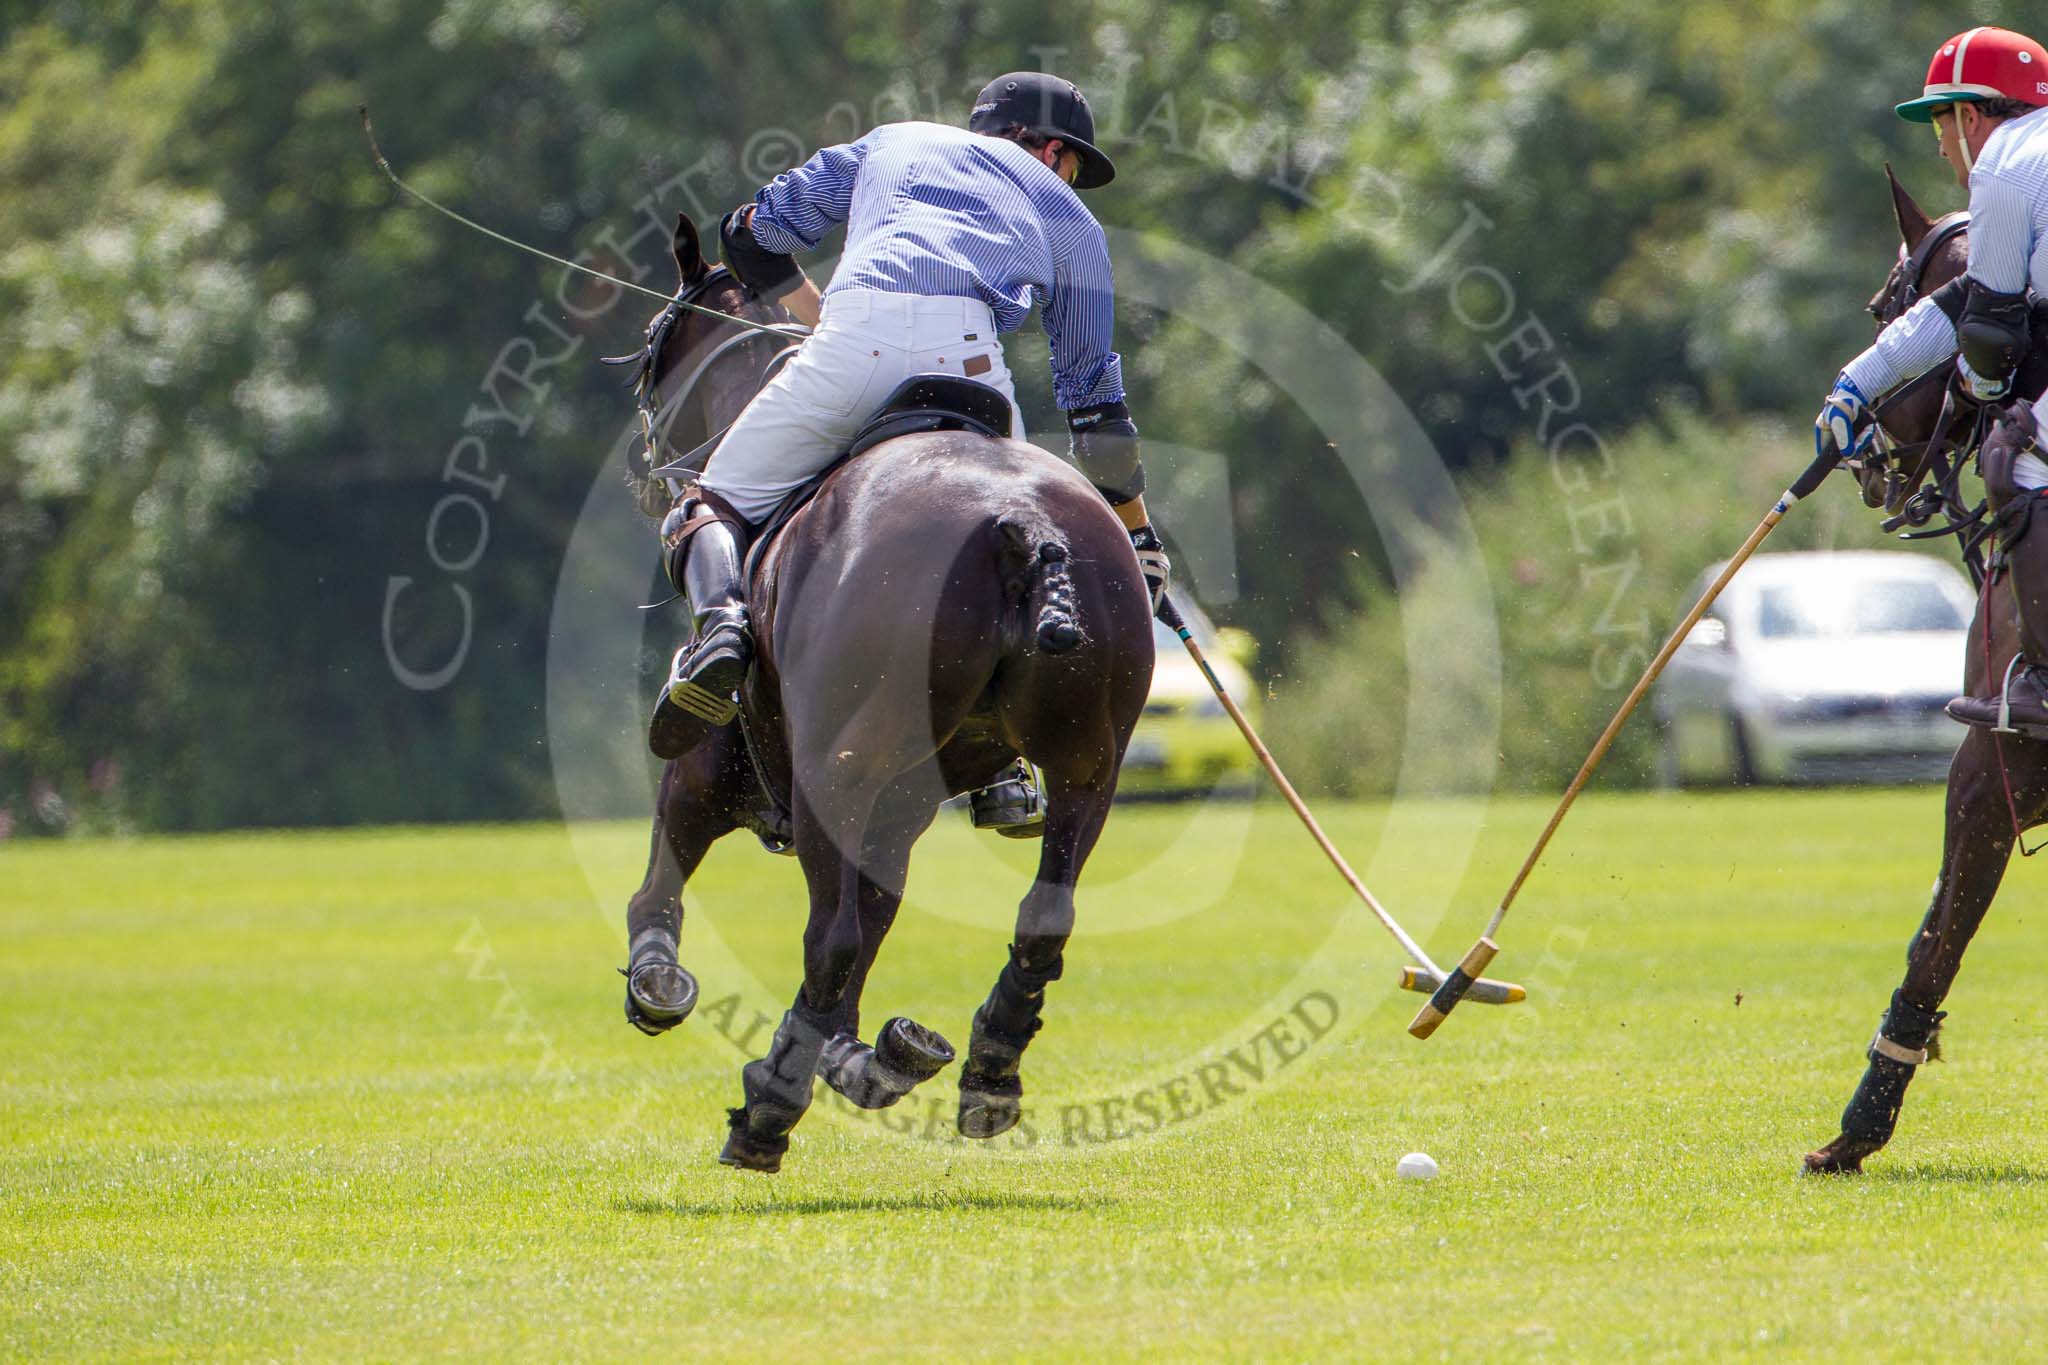 7th Heritage Polo Cup finals: John Martin, left, and Sebastian Funes..
Hurtwood Park Polo Club,
Ewhurst Green,
Surrey,
United Kingdom,
on 05 August 2012 at 13:18, image #13